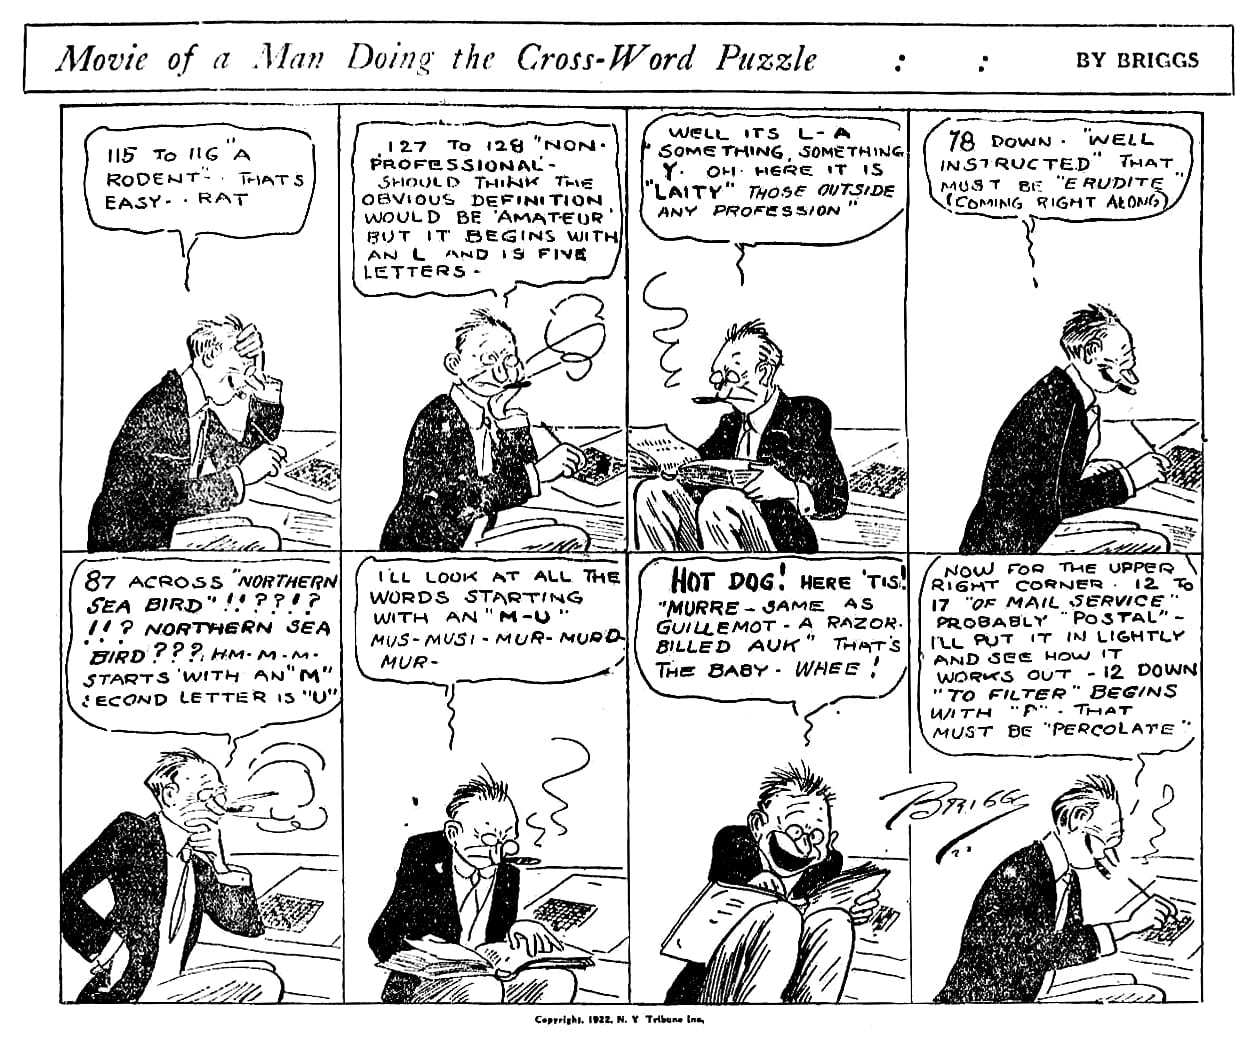 May 11, 1924: Crosswords invade the newspaper funnies